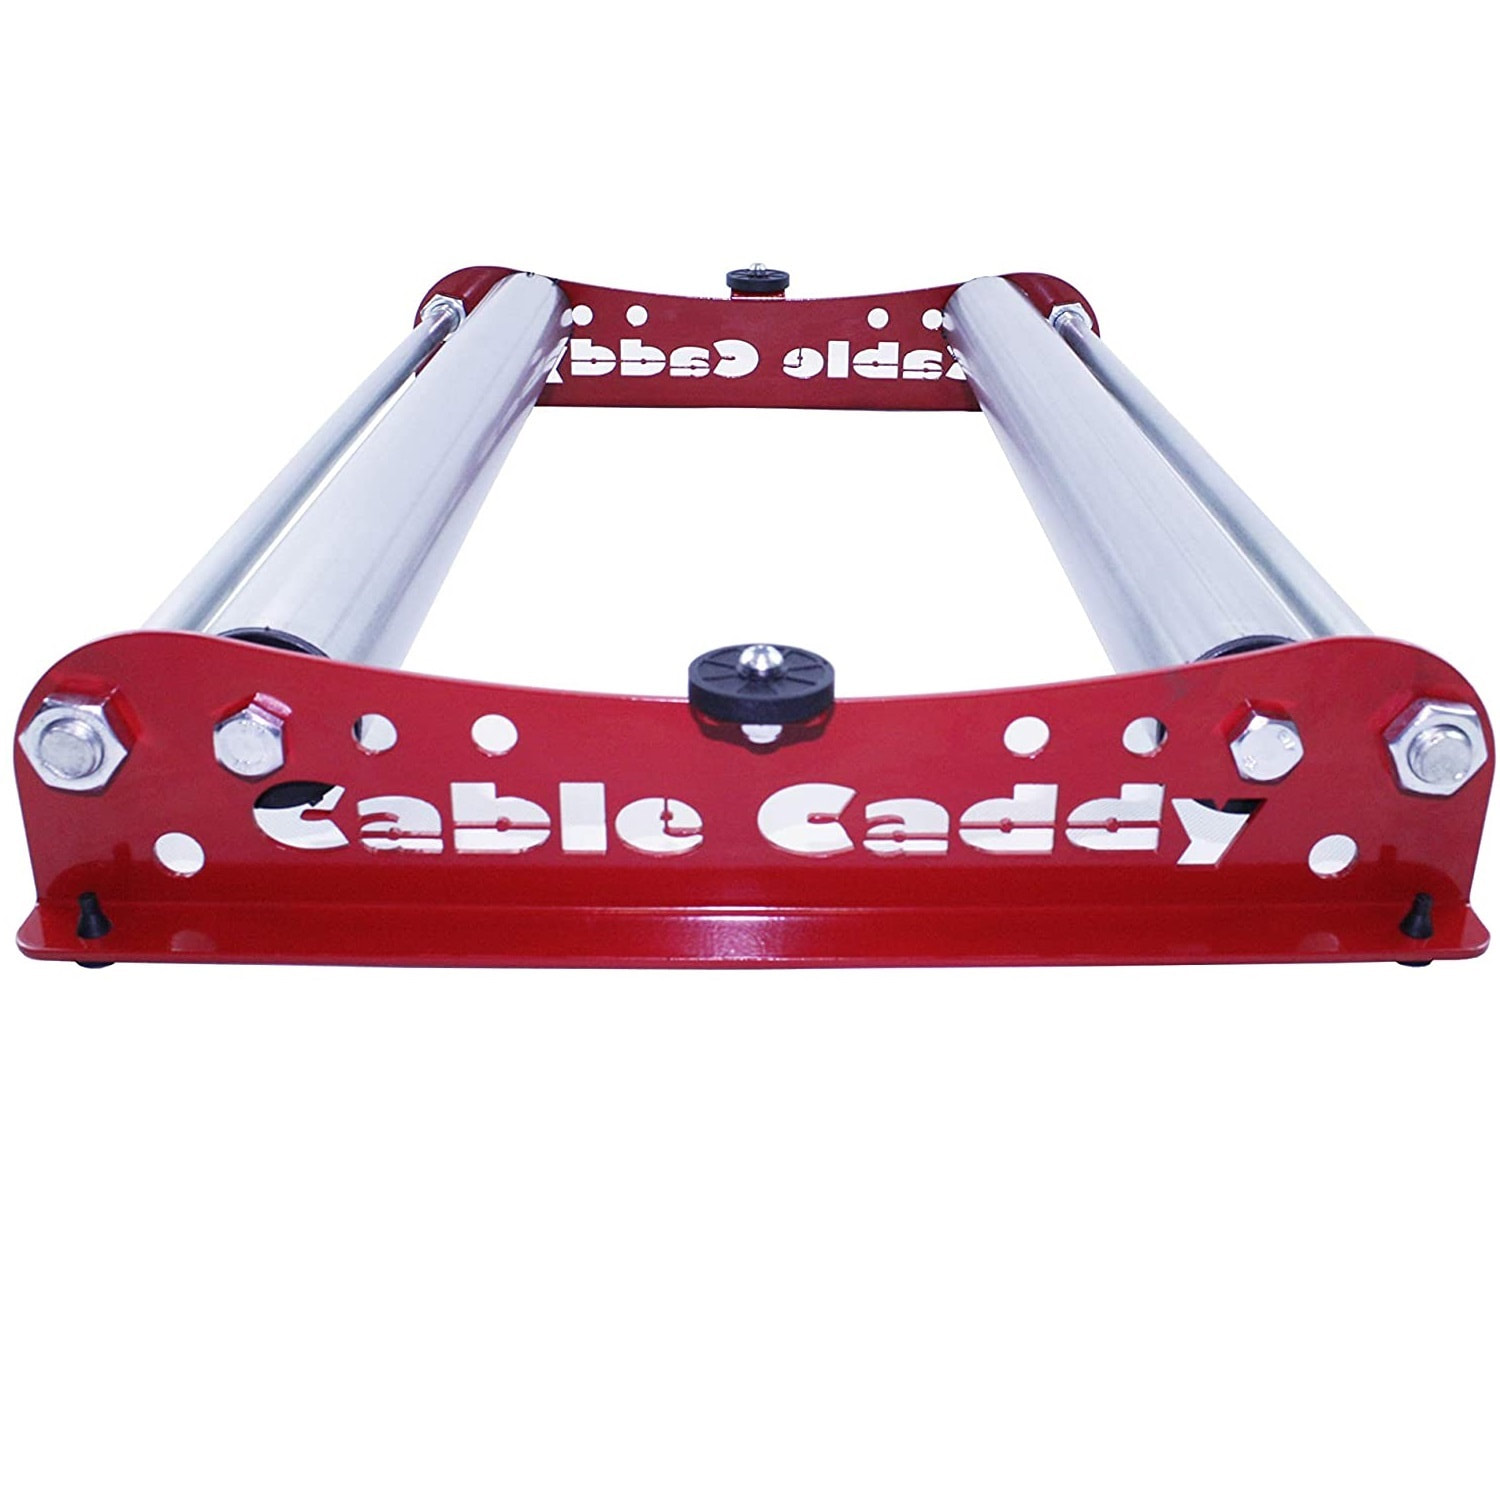 Reel-Deal Cable Caddy